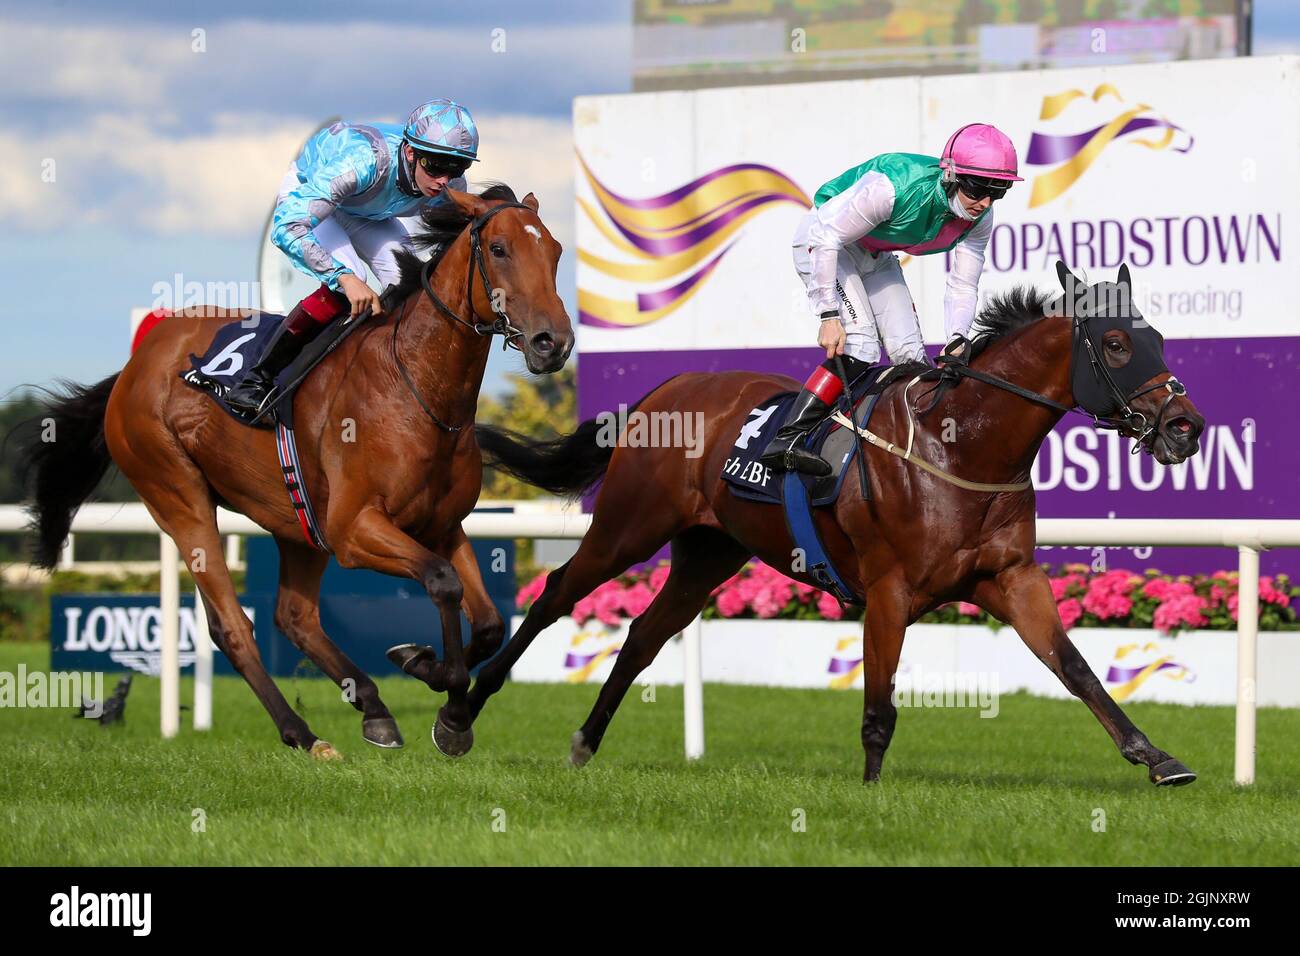 Dublin, USA. 11th Sep, 2021. September 11, 2021: Masen (GB) #4, ridden by jockey Colin Keane holds on to win the Sovereign Path Handicap on the turf on Irish Champions Weekend at Leopardstown Racecourse in Dublin, Ireland on September 11th, 2021. Shamela HanleyEclipse SportswireCSM/Alamy Live News Stock Photo